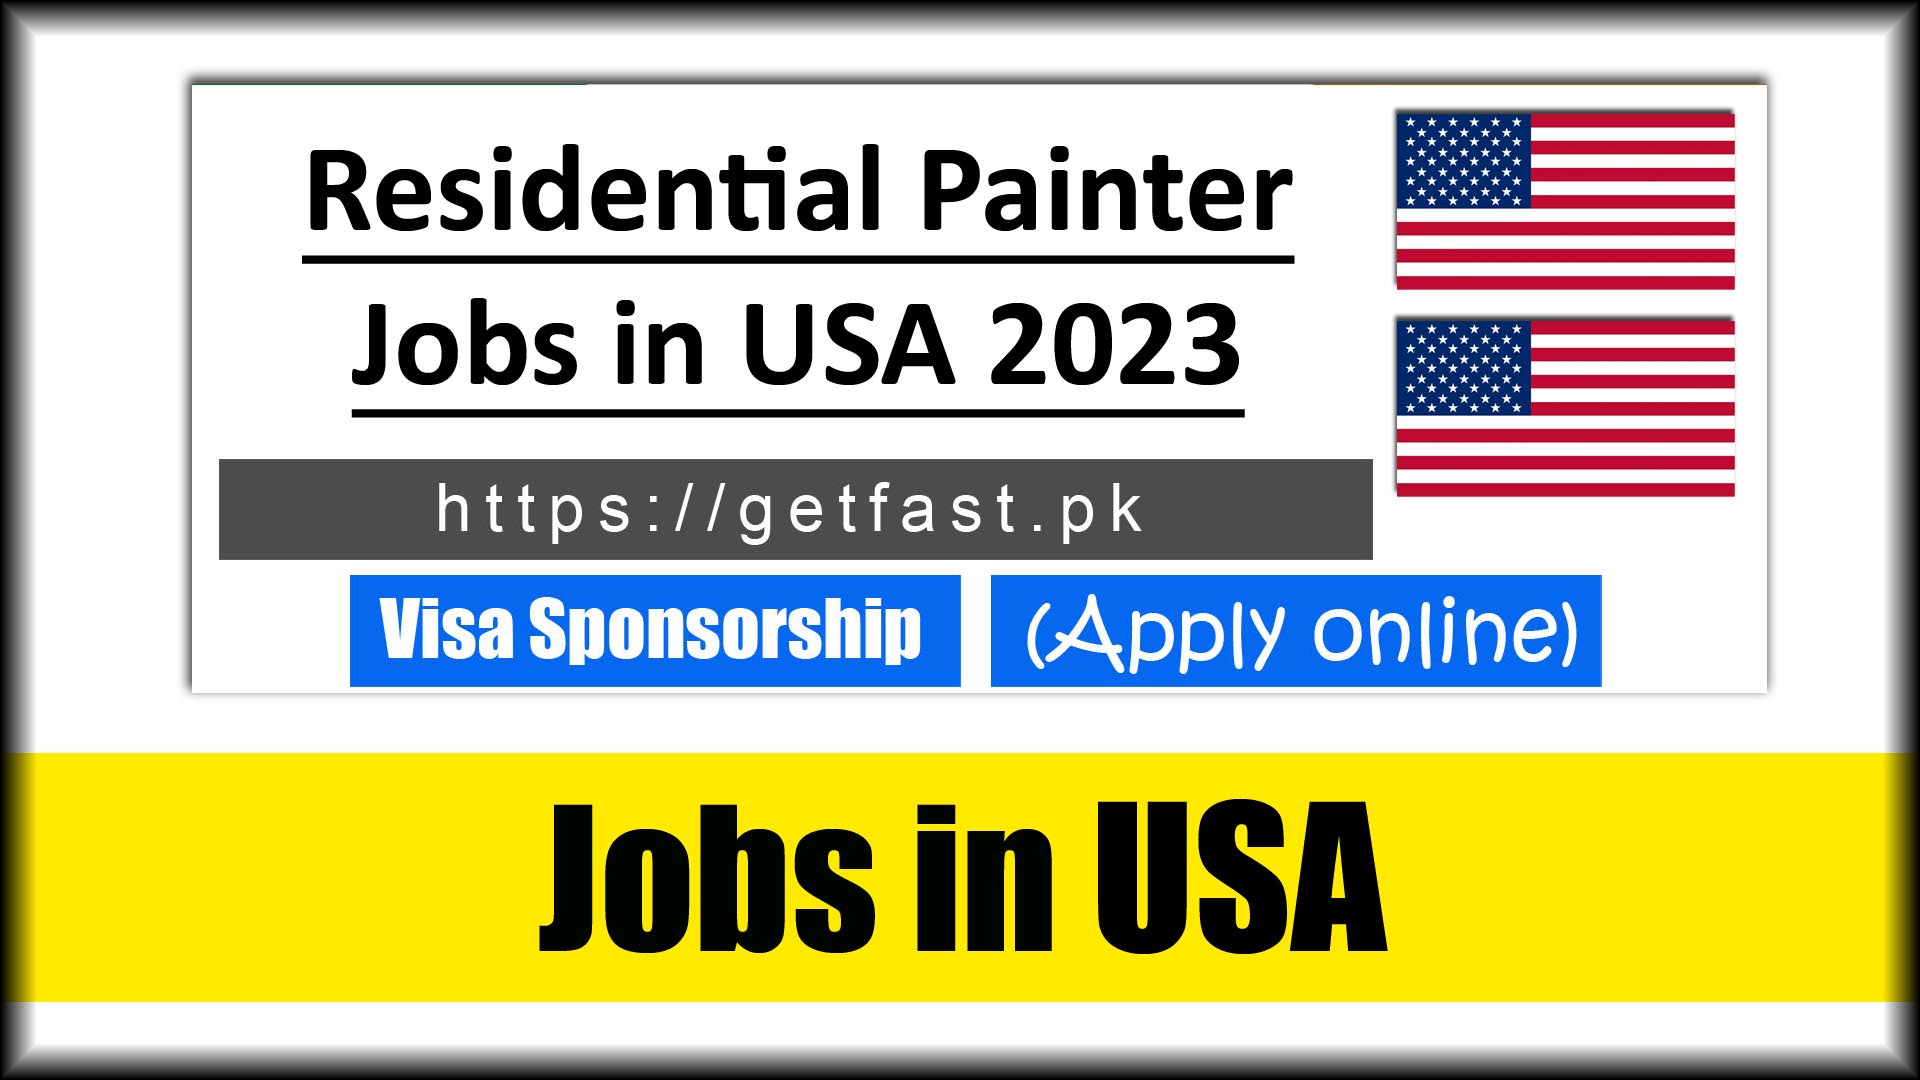 Residential Painter Jobs in USA 2023 for foreigners - Apply Online